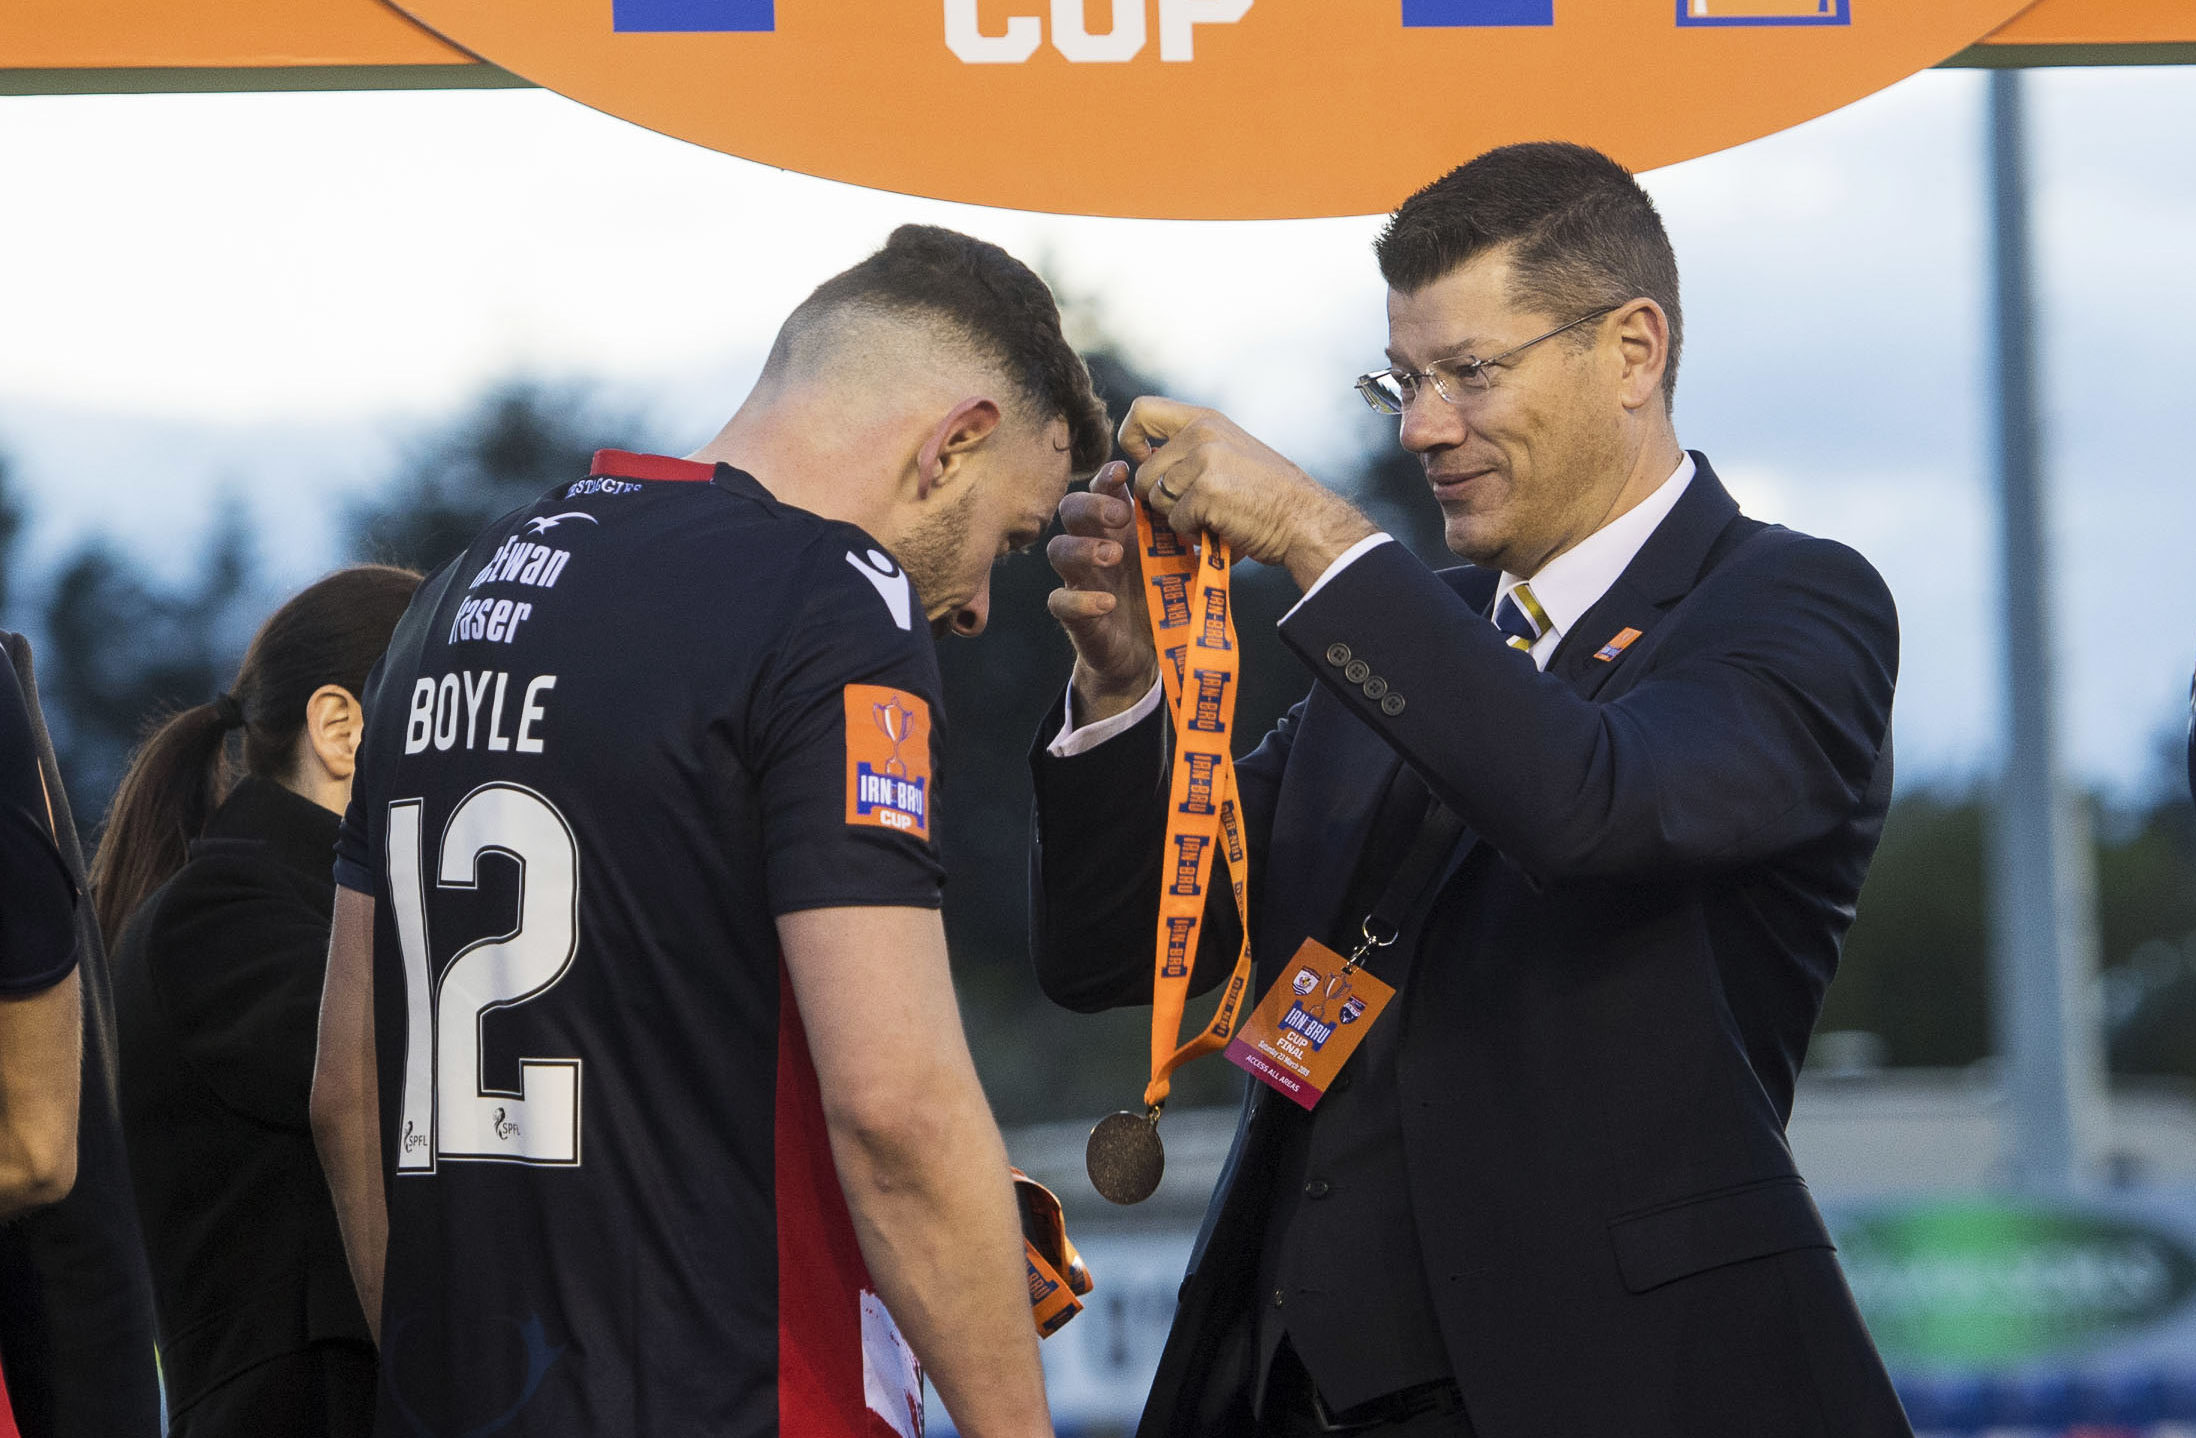 Andy Boyle receives his IRN-BRU Cup medal from SPFL chief executive Neil Doncaster.